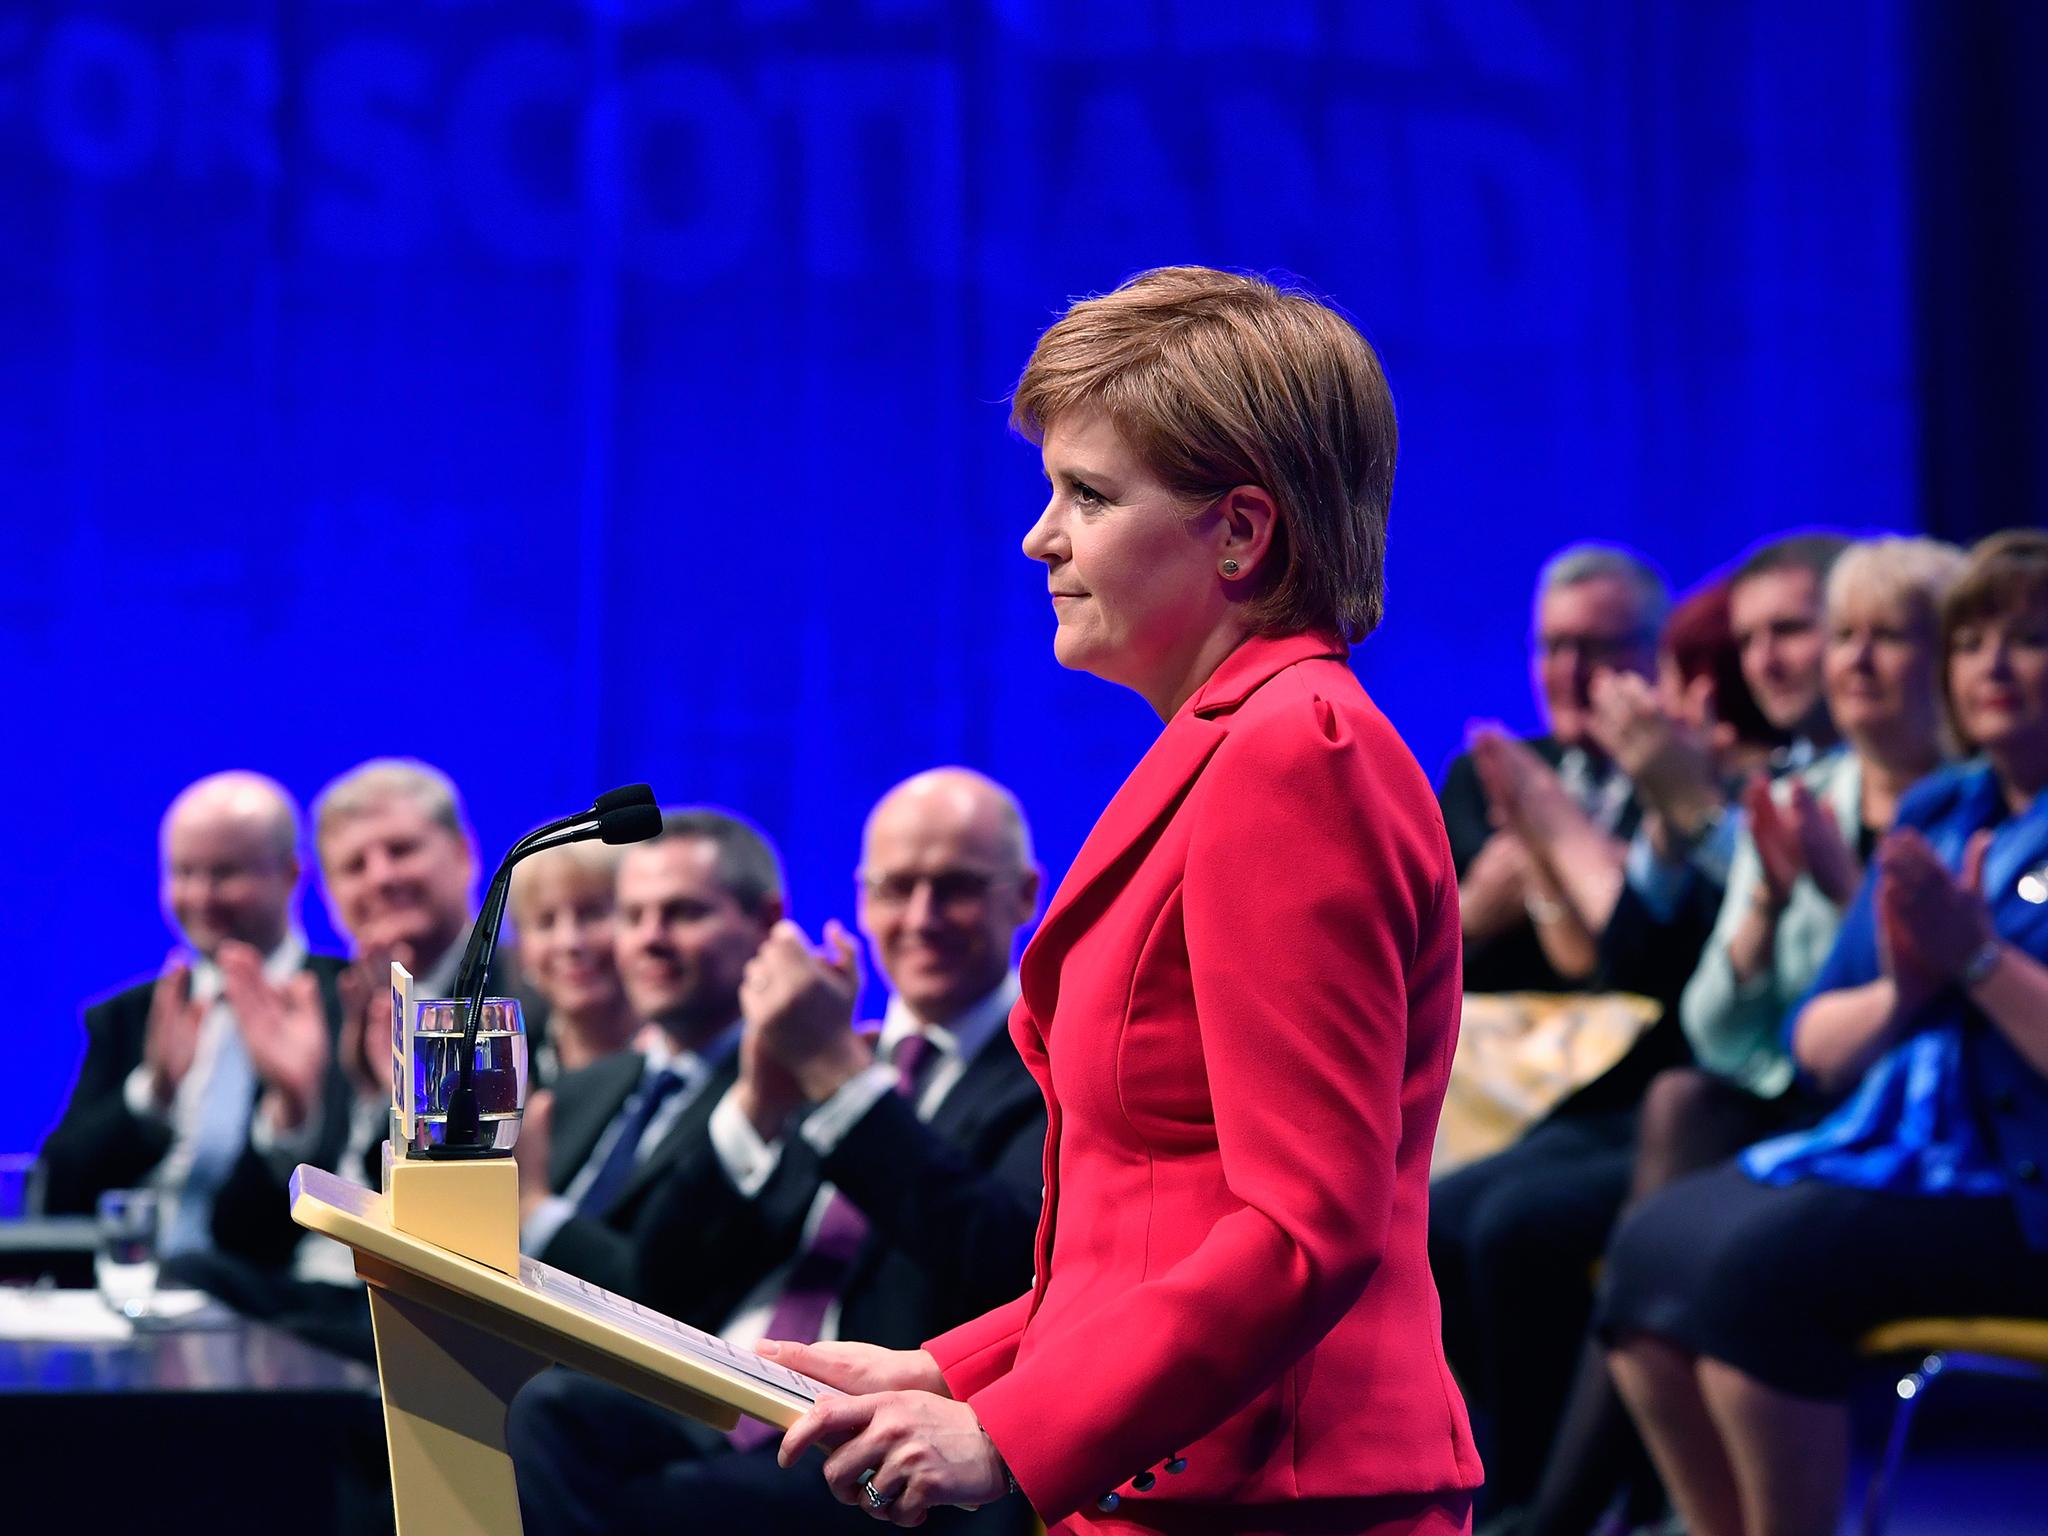 The SNP leader has said the UK leaving the EU would not mean Scotland could not make its own separate trade arrangement